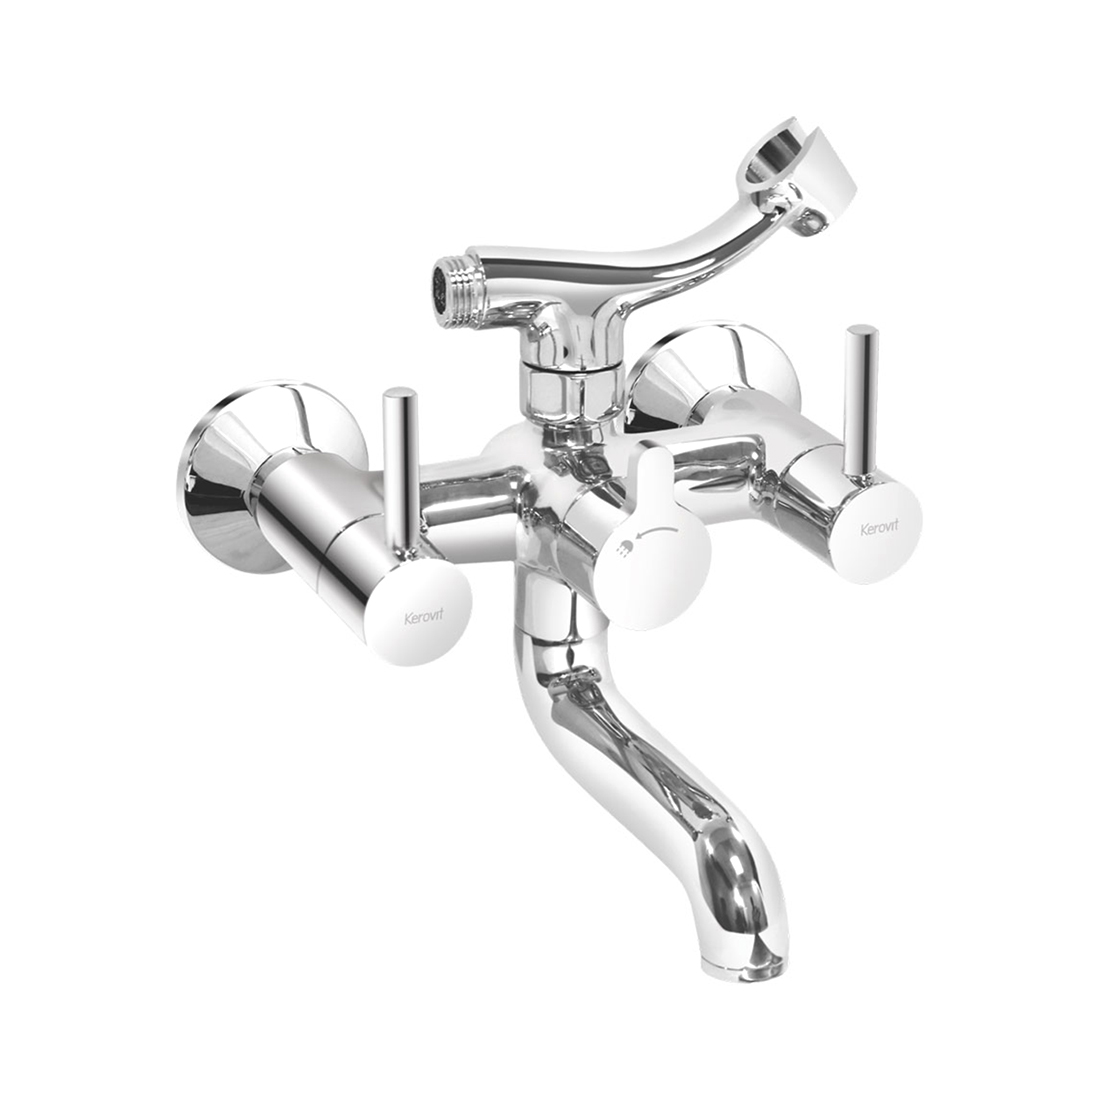 Kerovit Nucleus KB111020 2-in-1 Wall Mixer With Crutch